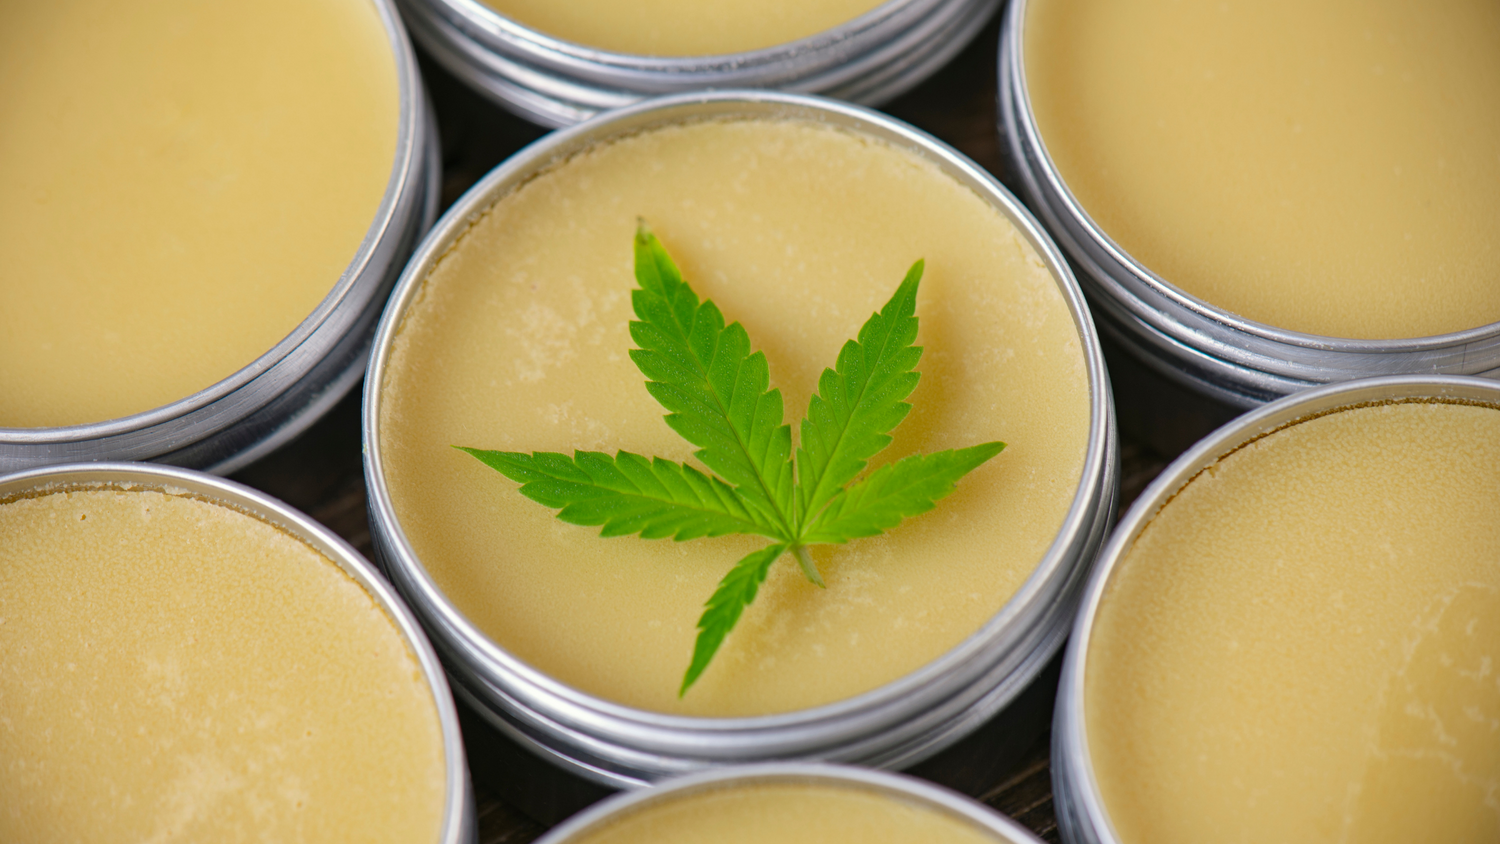 how to choose a CBD product